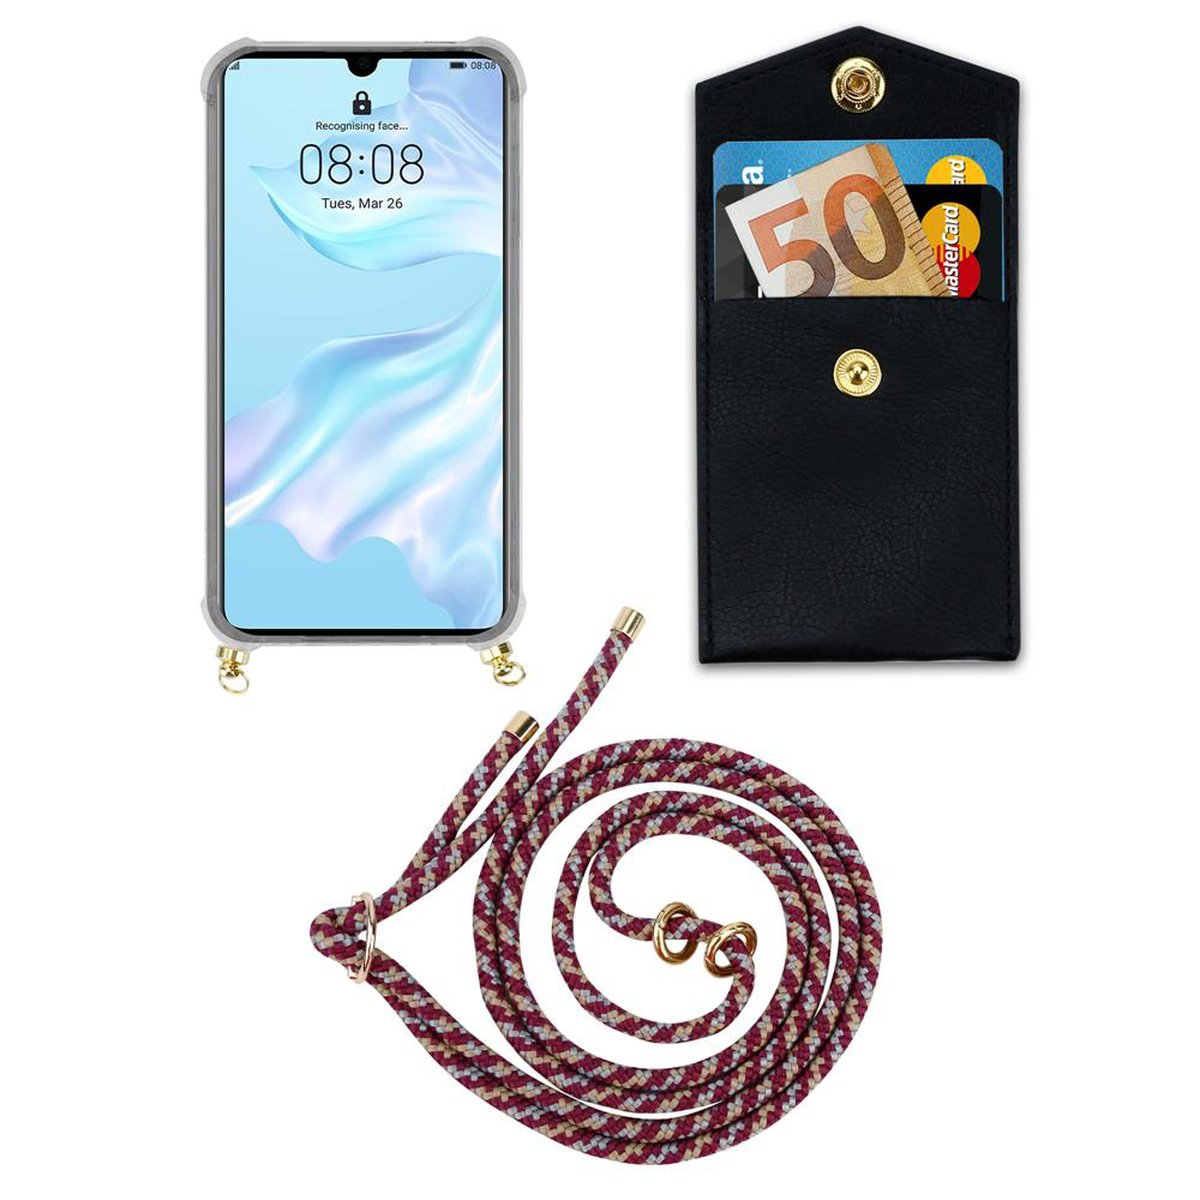 und abnehmbarer Gold Huawei, P30, Band GELB WEIß Backcover, Kette mit Handy CADORABO Ringen, Kordel ROT Hülle,